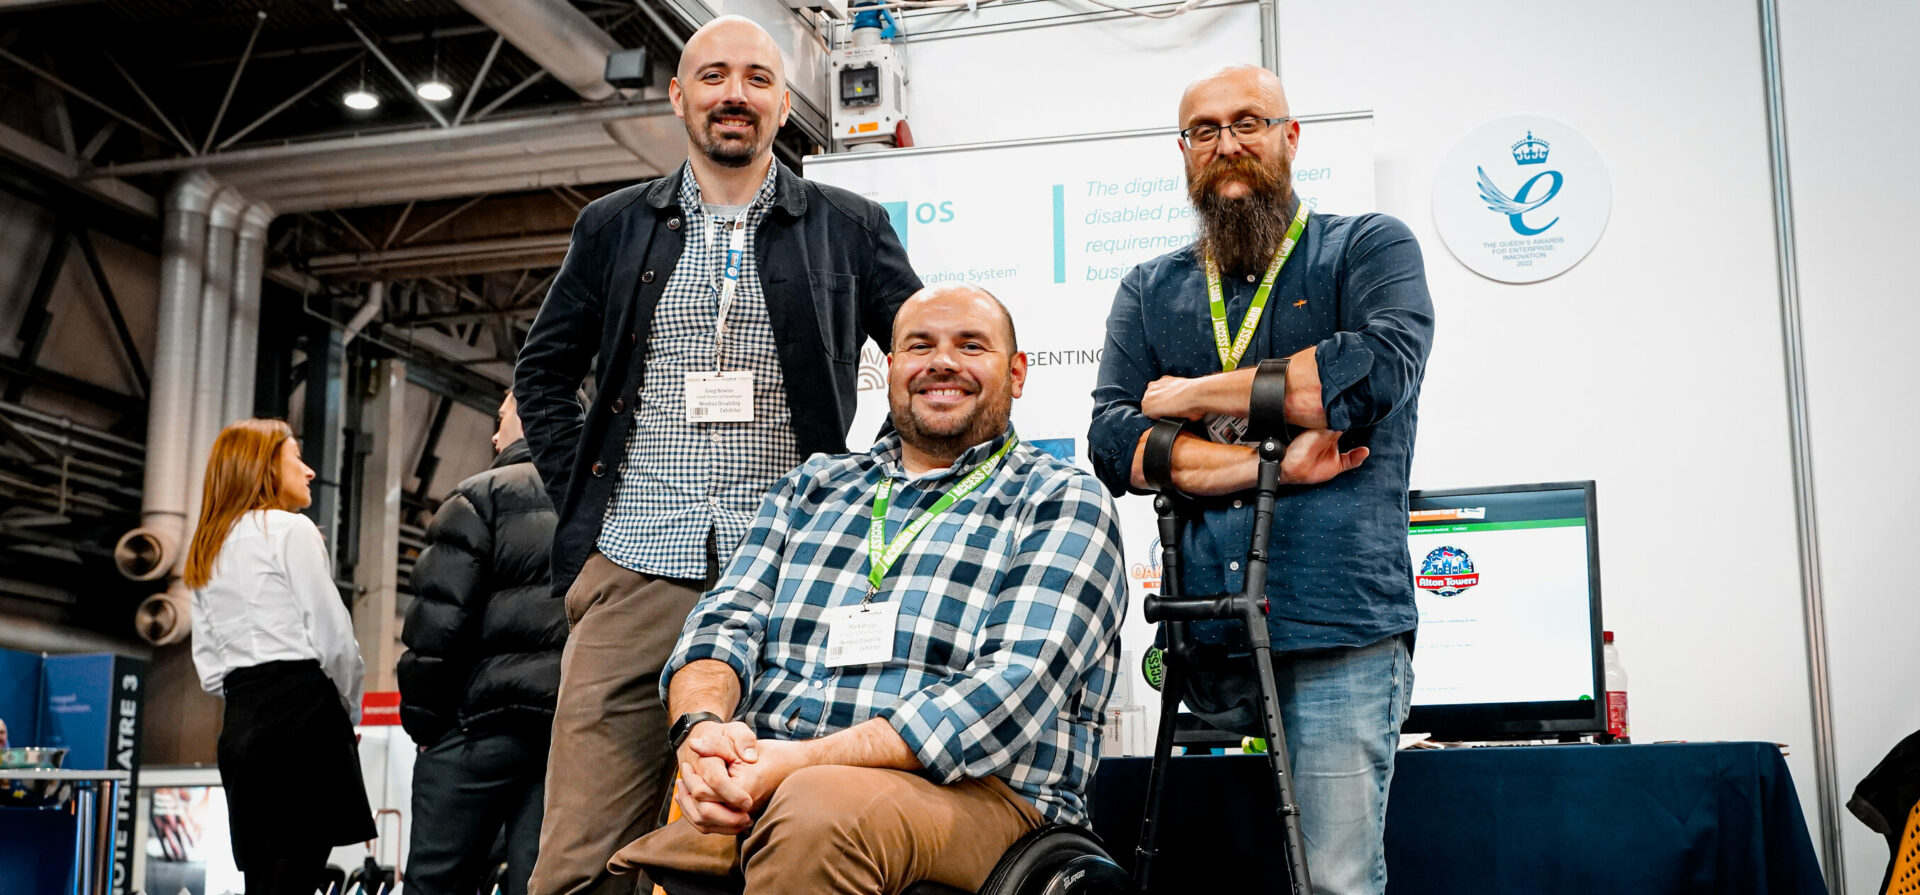 The Nimbus Disability team - from left to right: Greg Bowler (software development), Mark Briggs (director of partnerships), Martin Austin (managing director)